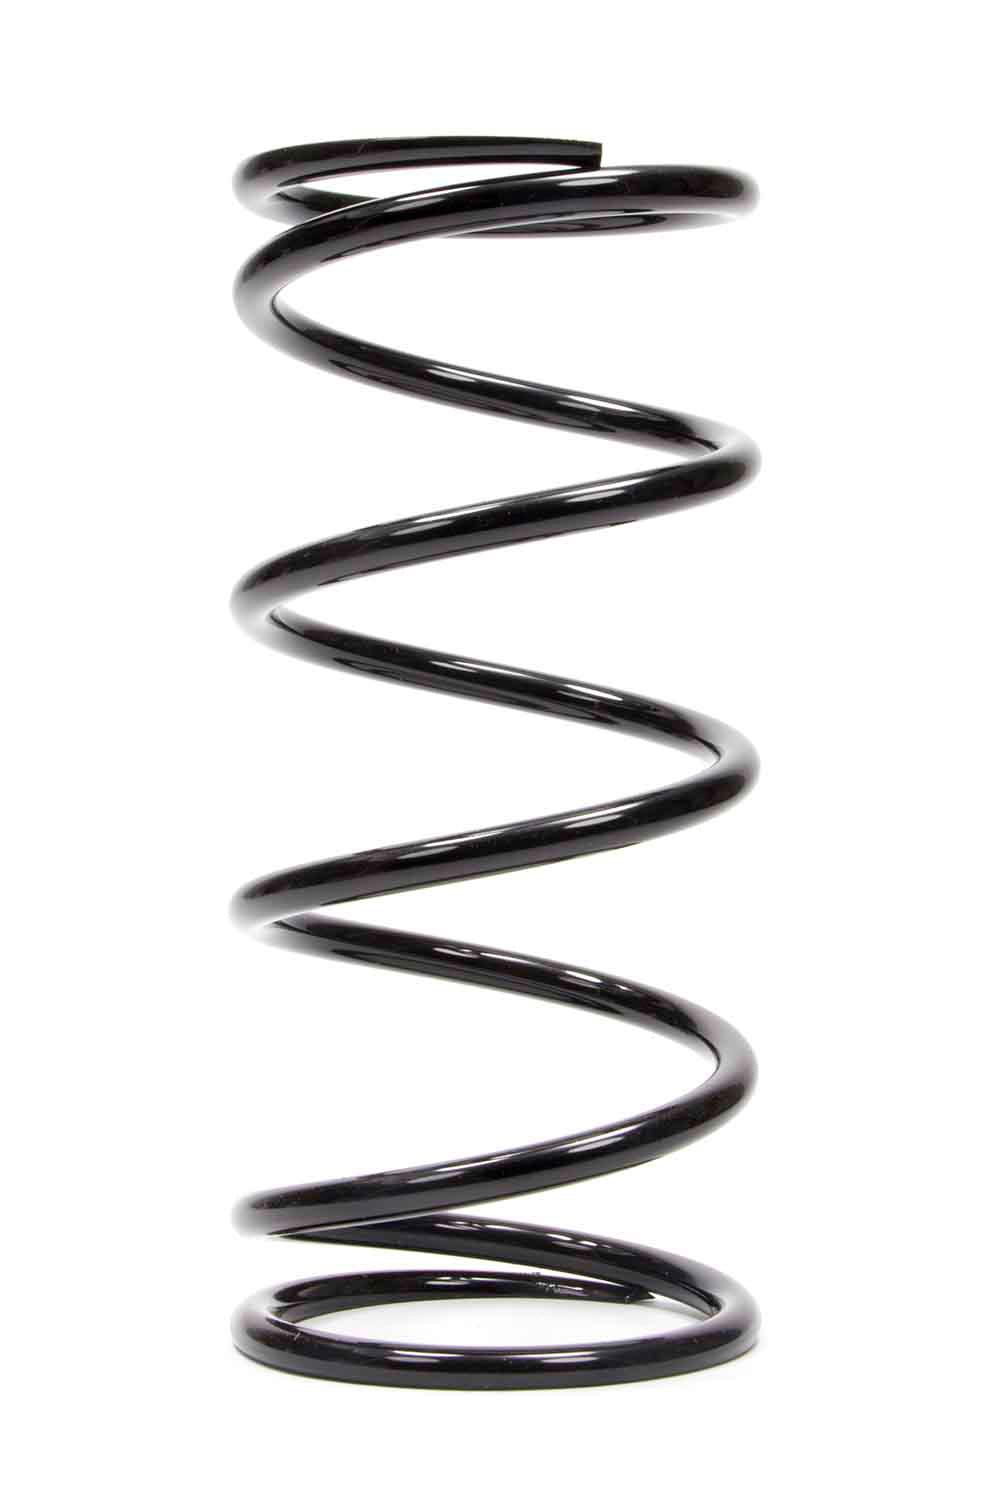 Conv Rear Spring 5in x 11in x 225 - Burlile Performance Products